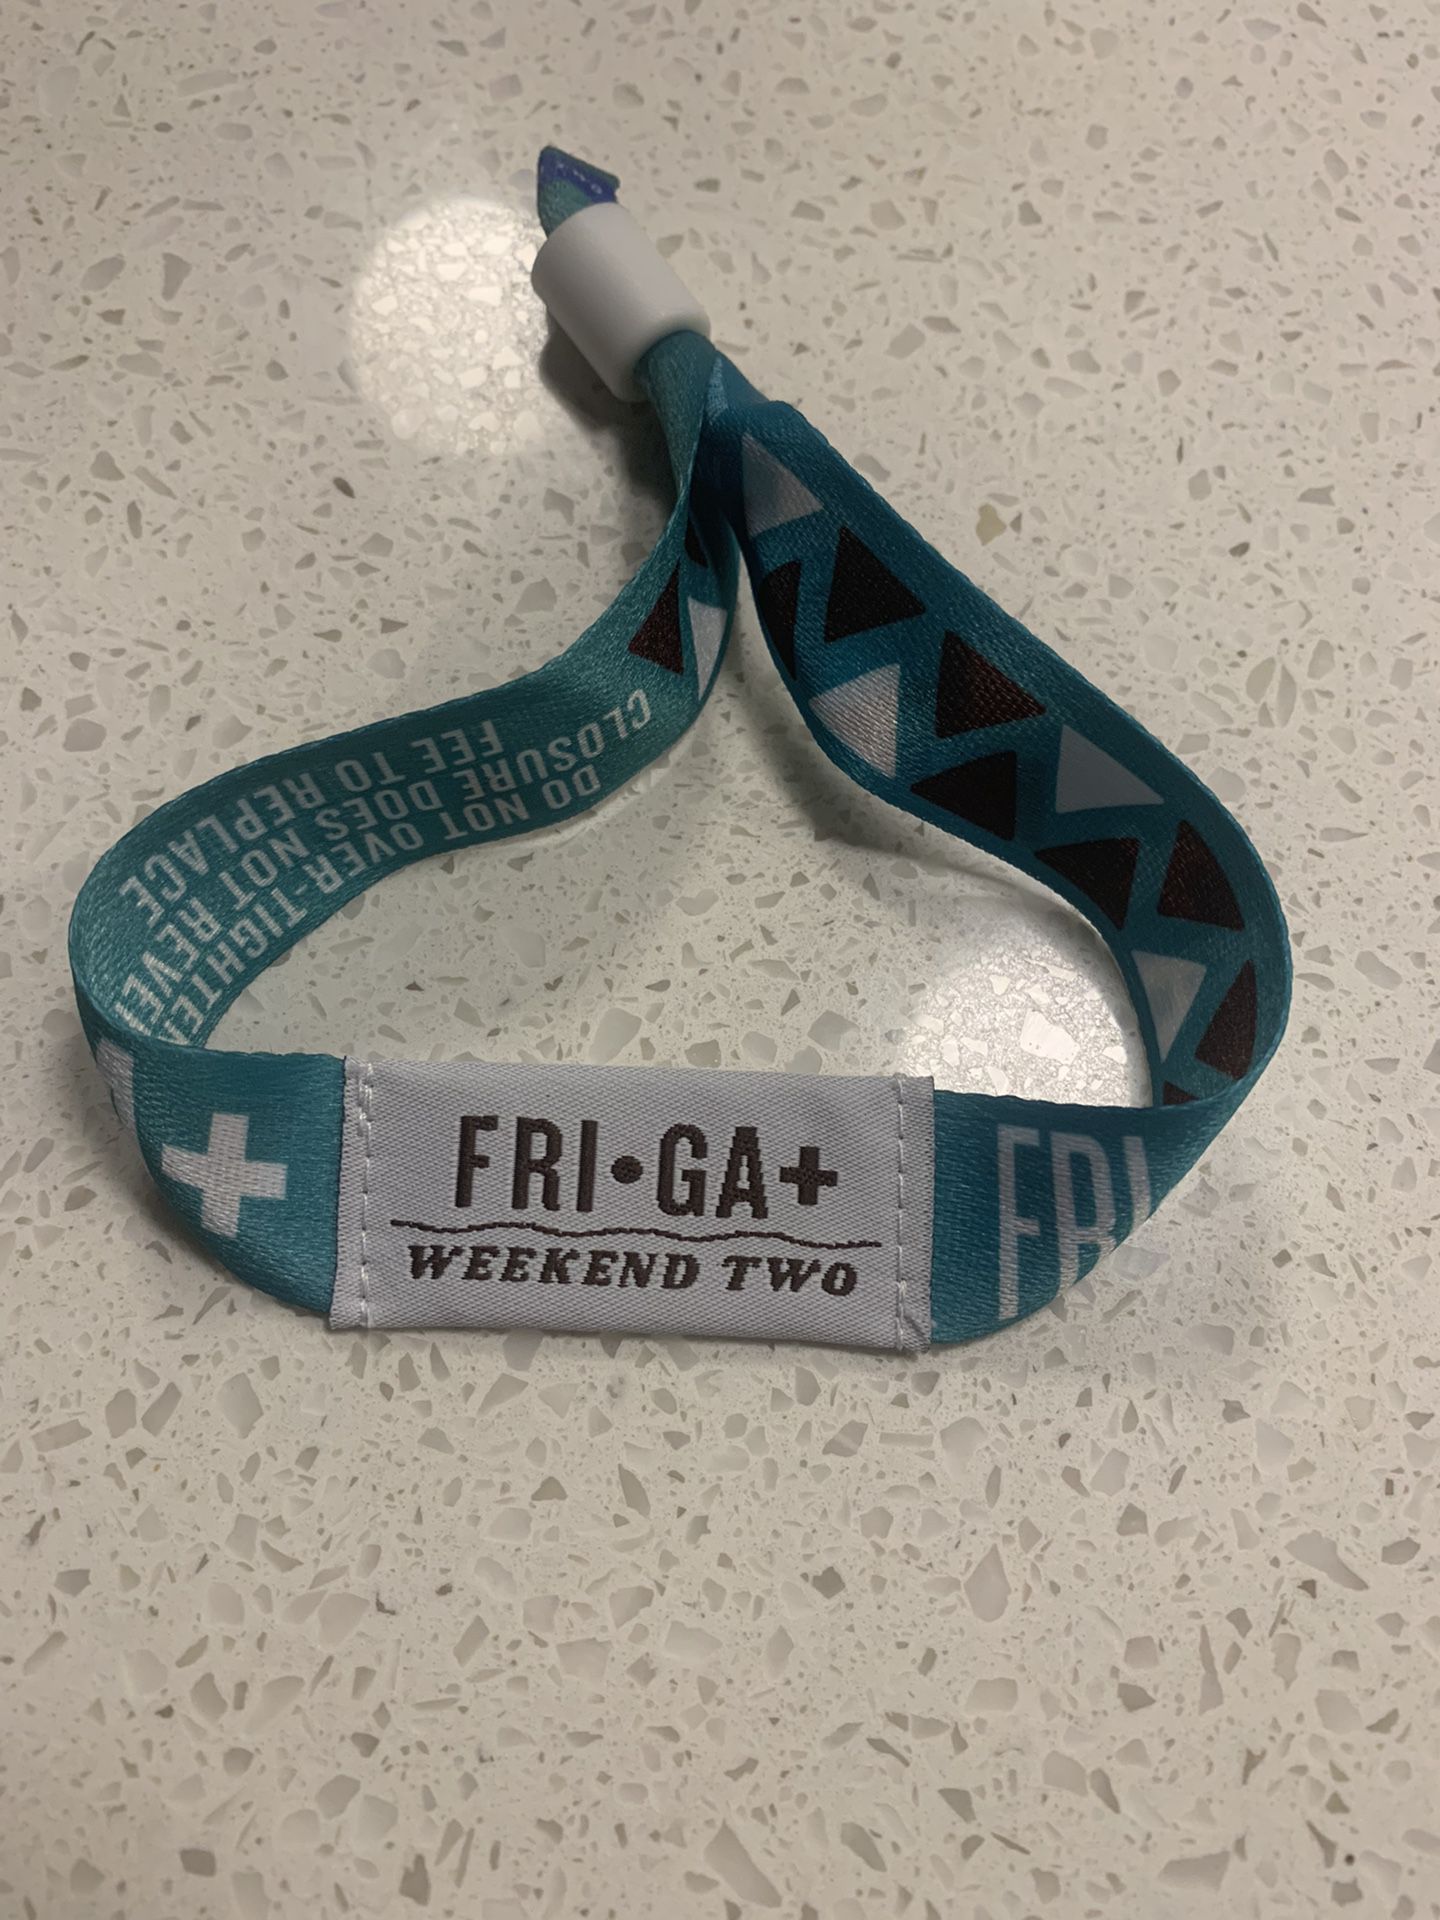 ACL Friday GA+ Pass